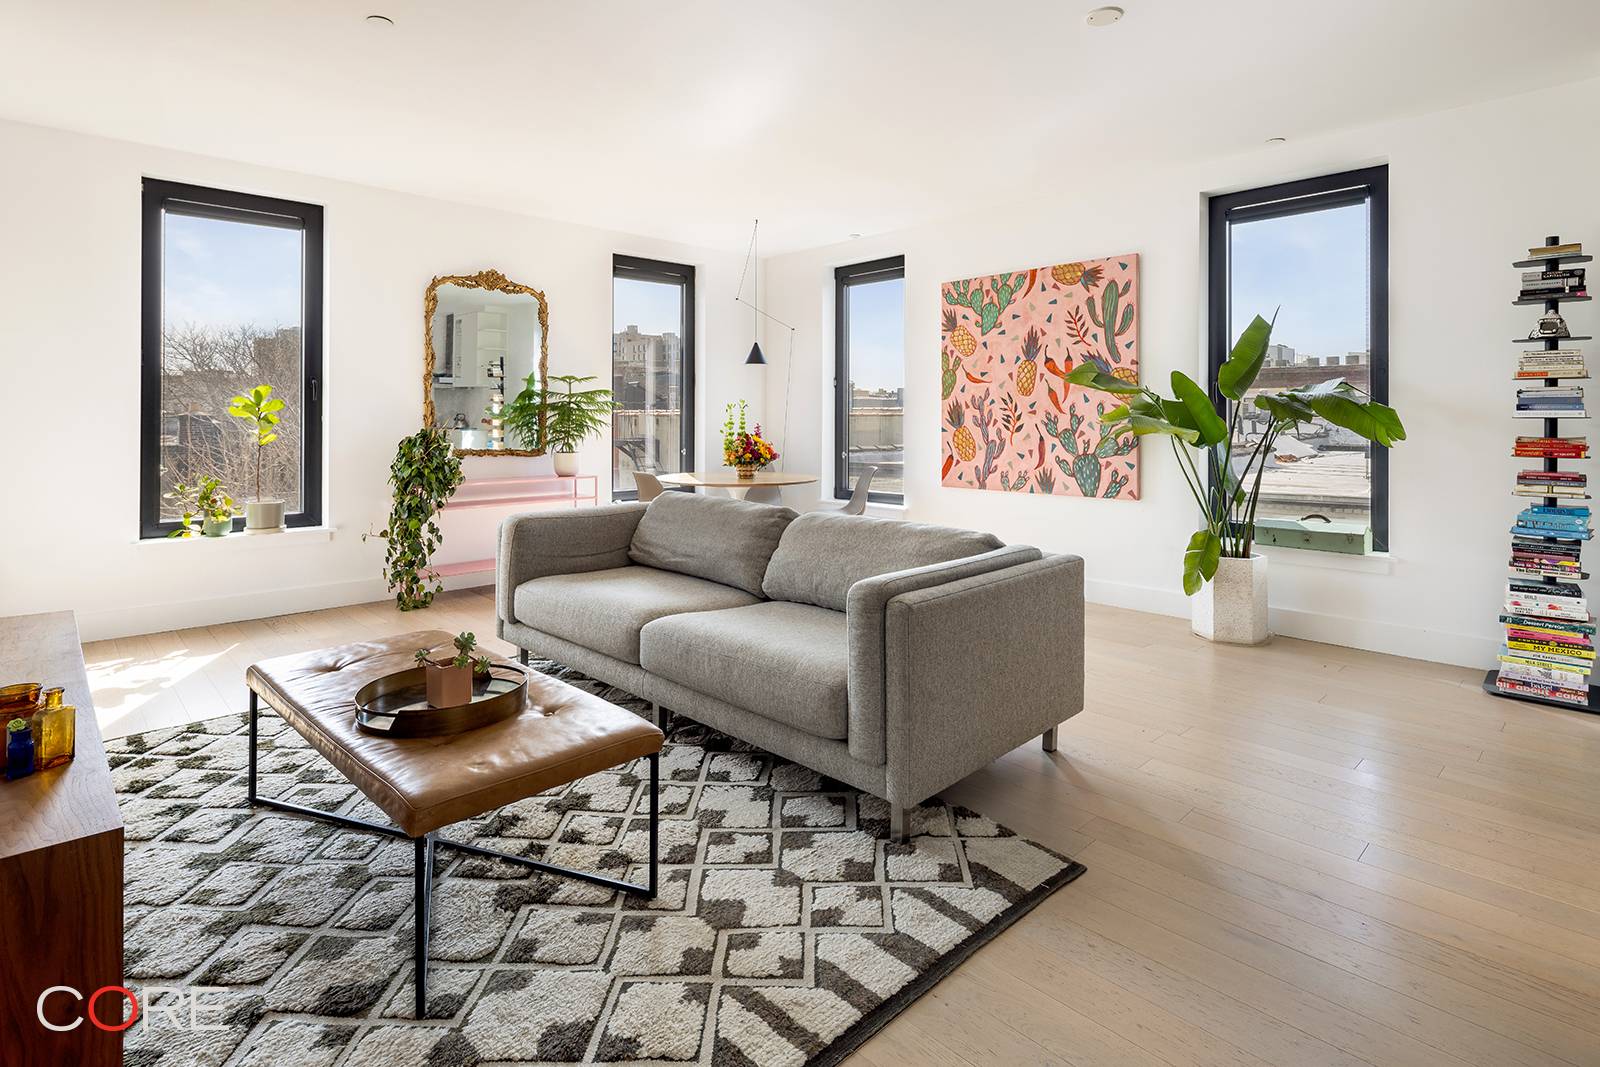 This sleek three bedroom, two bathroom home is located in a boutique, pet friendly Crown Heights building with on site parking, bicycle storage, and a common rooftop terrace.